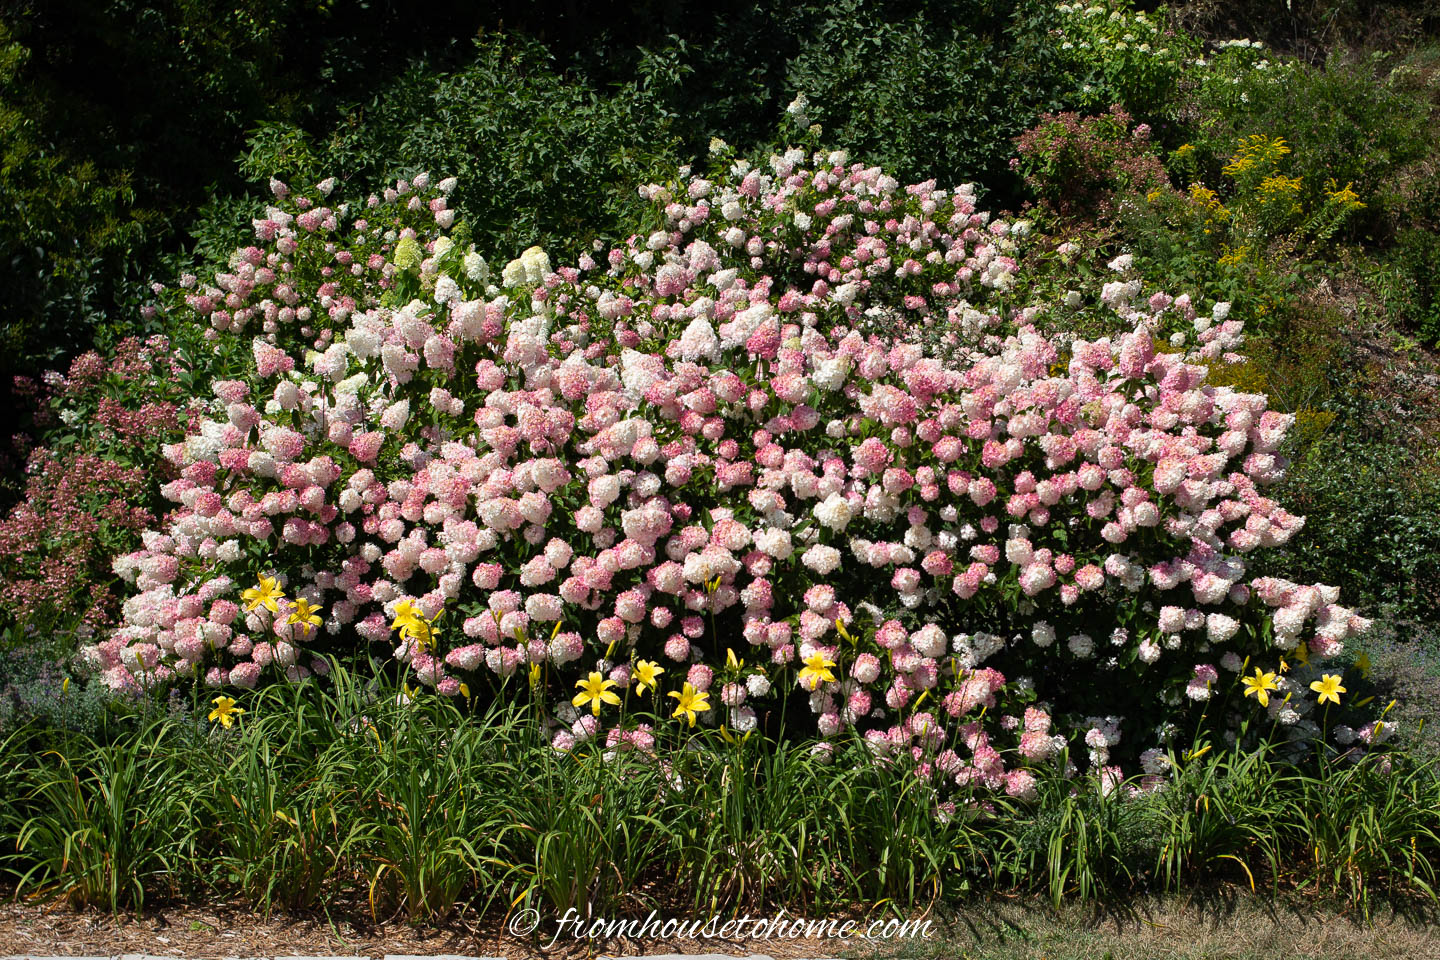 Hydrangea paniculata bush with pink and white flowers